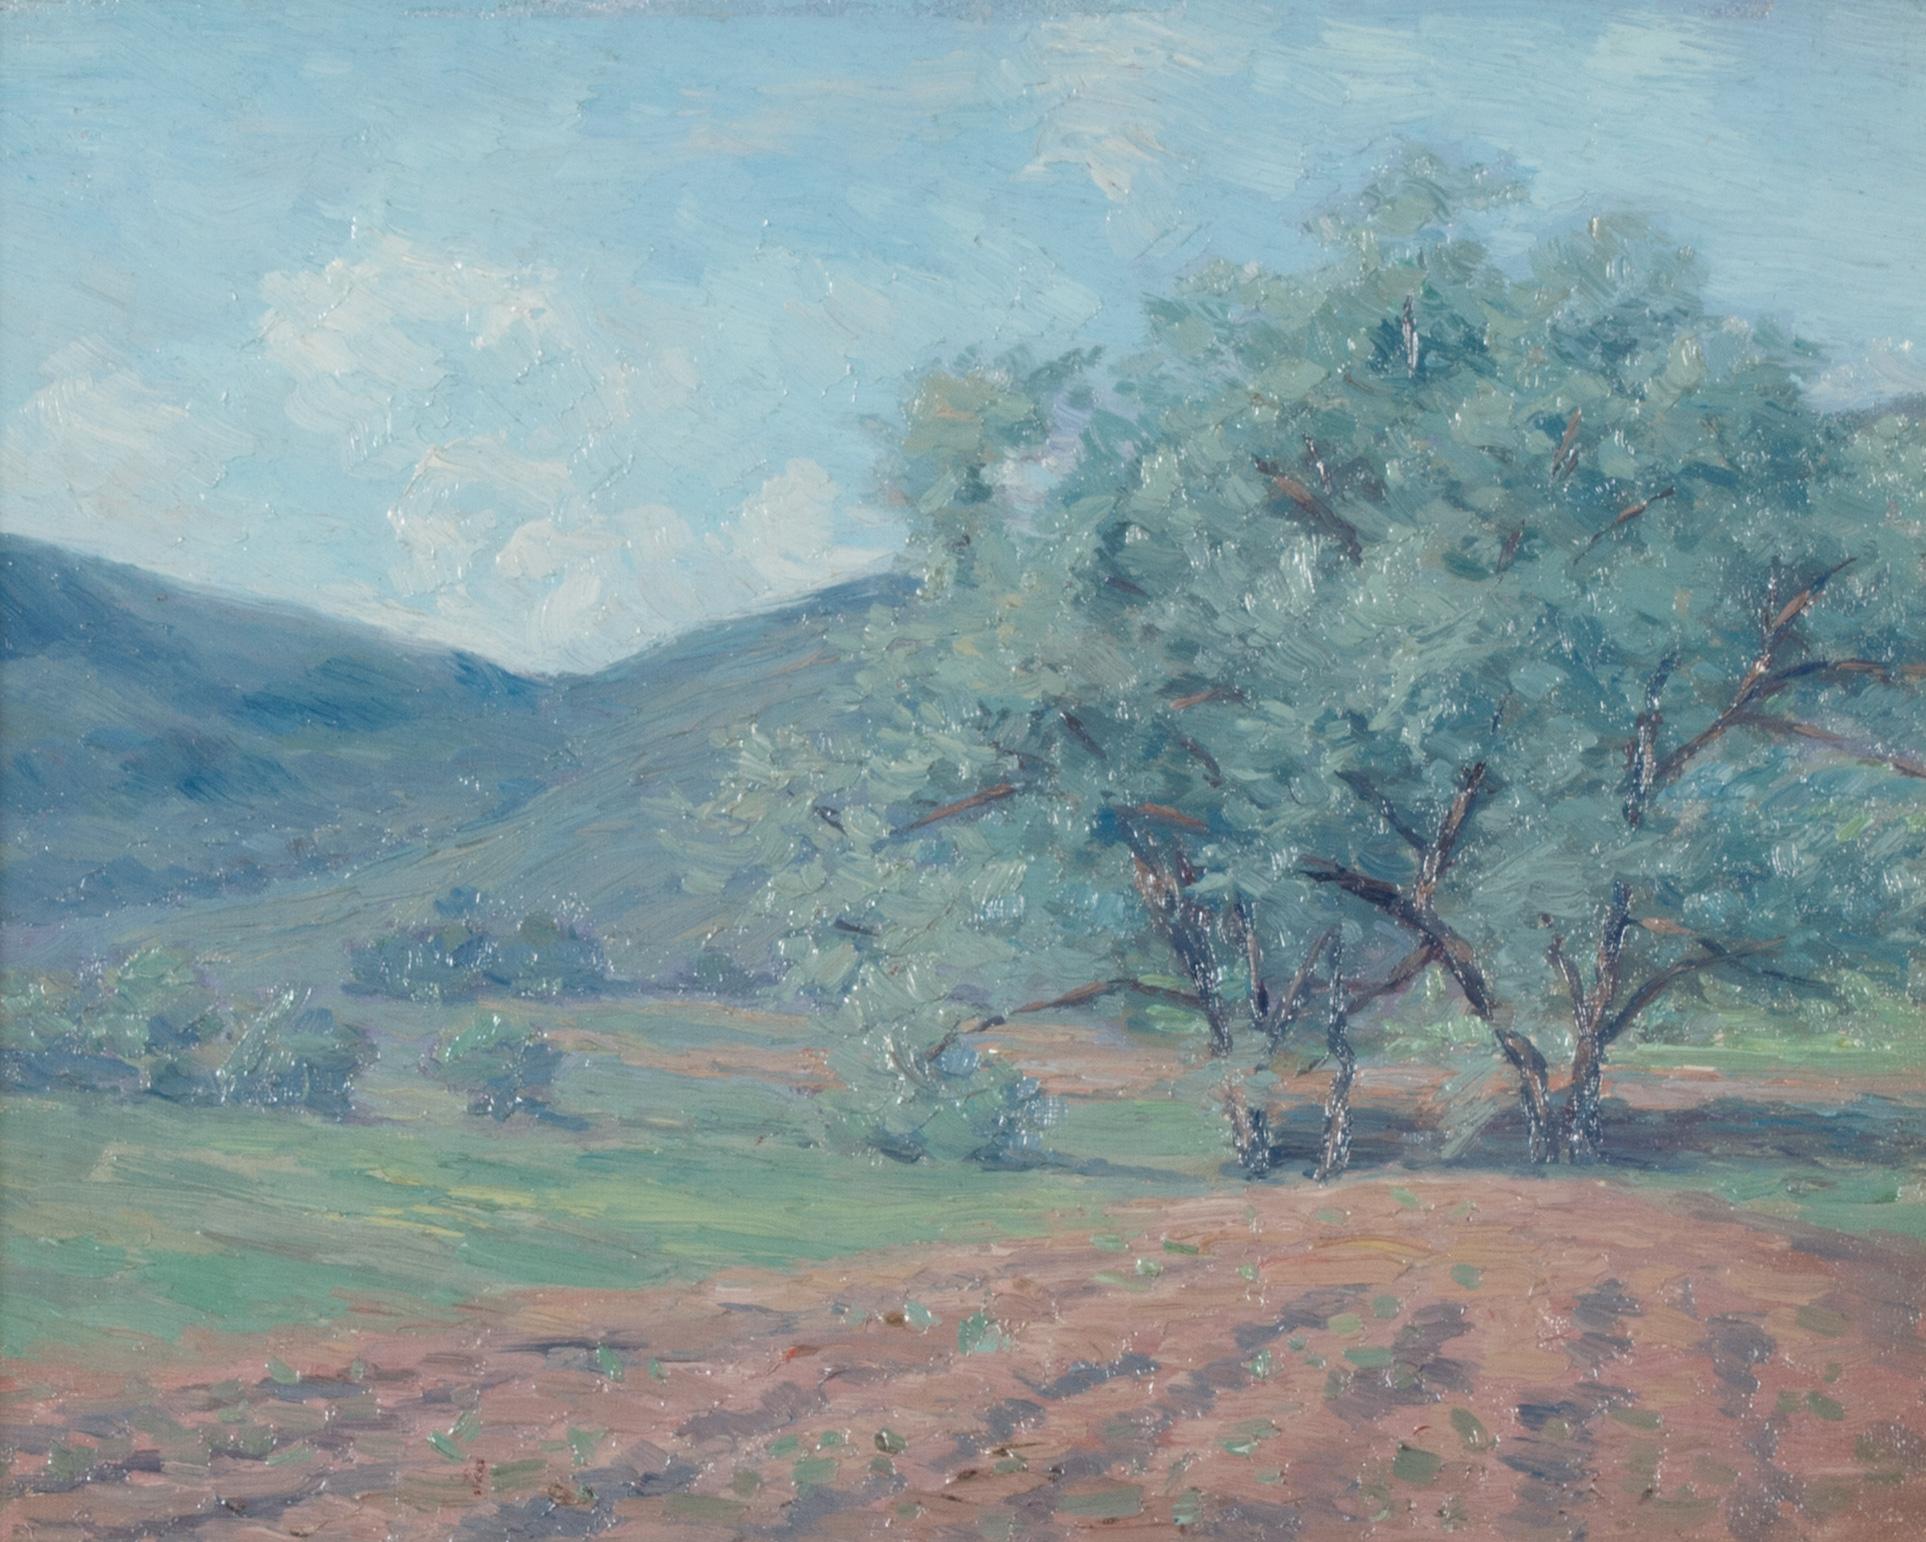 Woodstock: Field with Trees in Hilly Landscape - Painting by William S. Butz